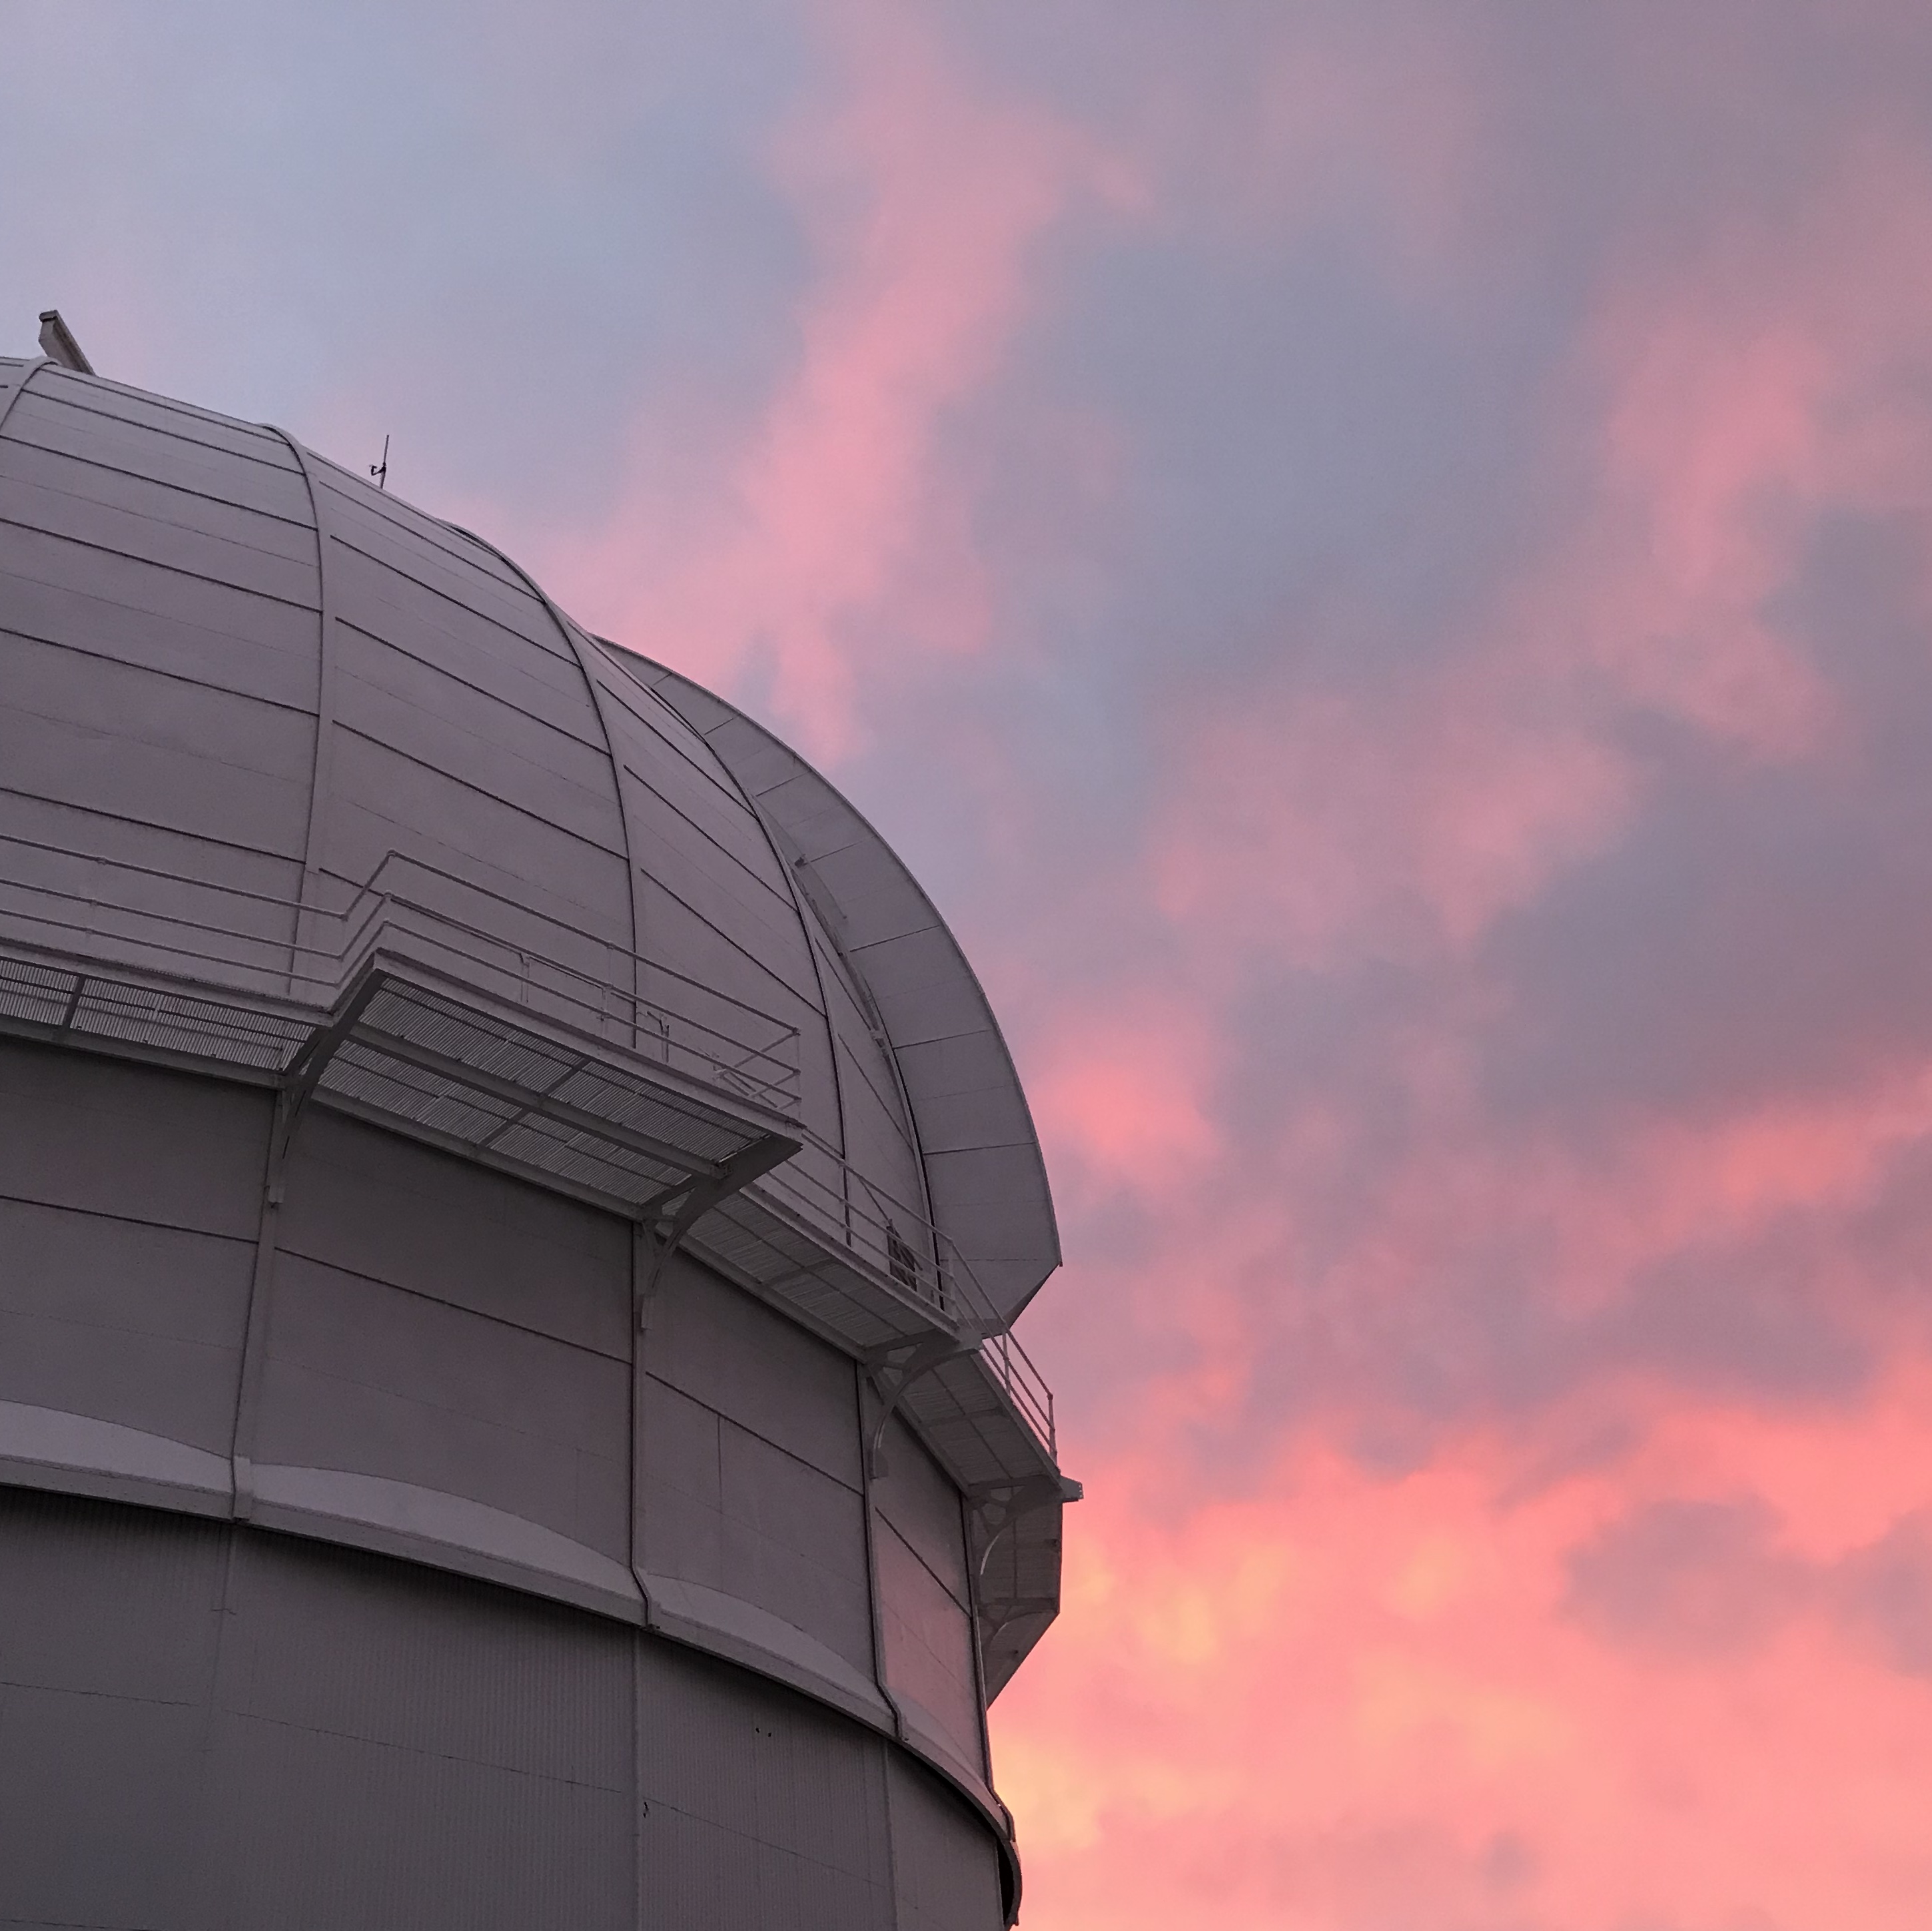 100-in telescope dome at Mount Wilson Observatory at sunset.